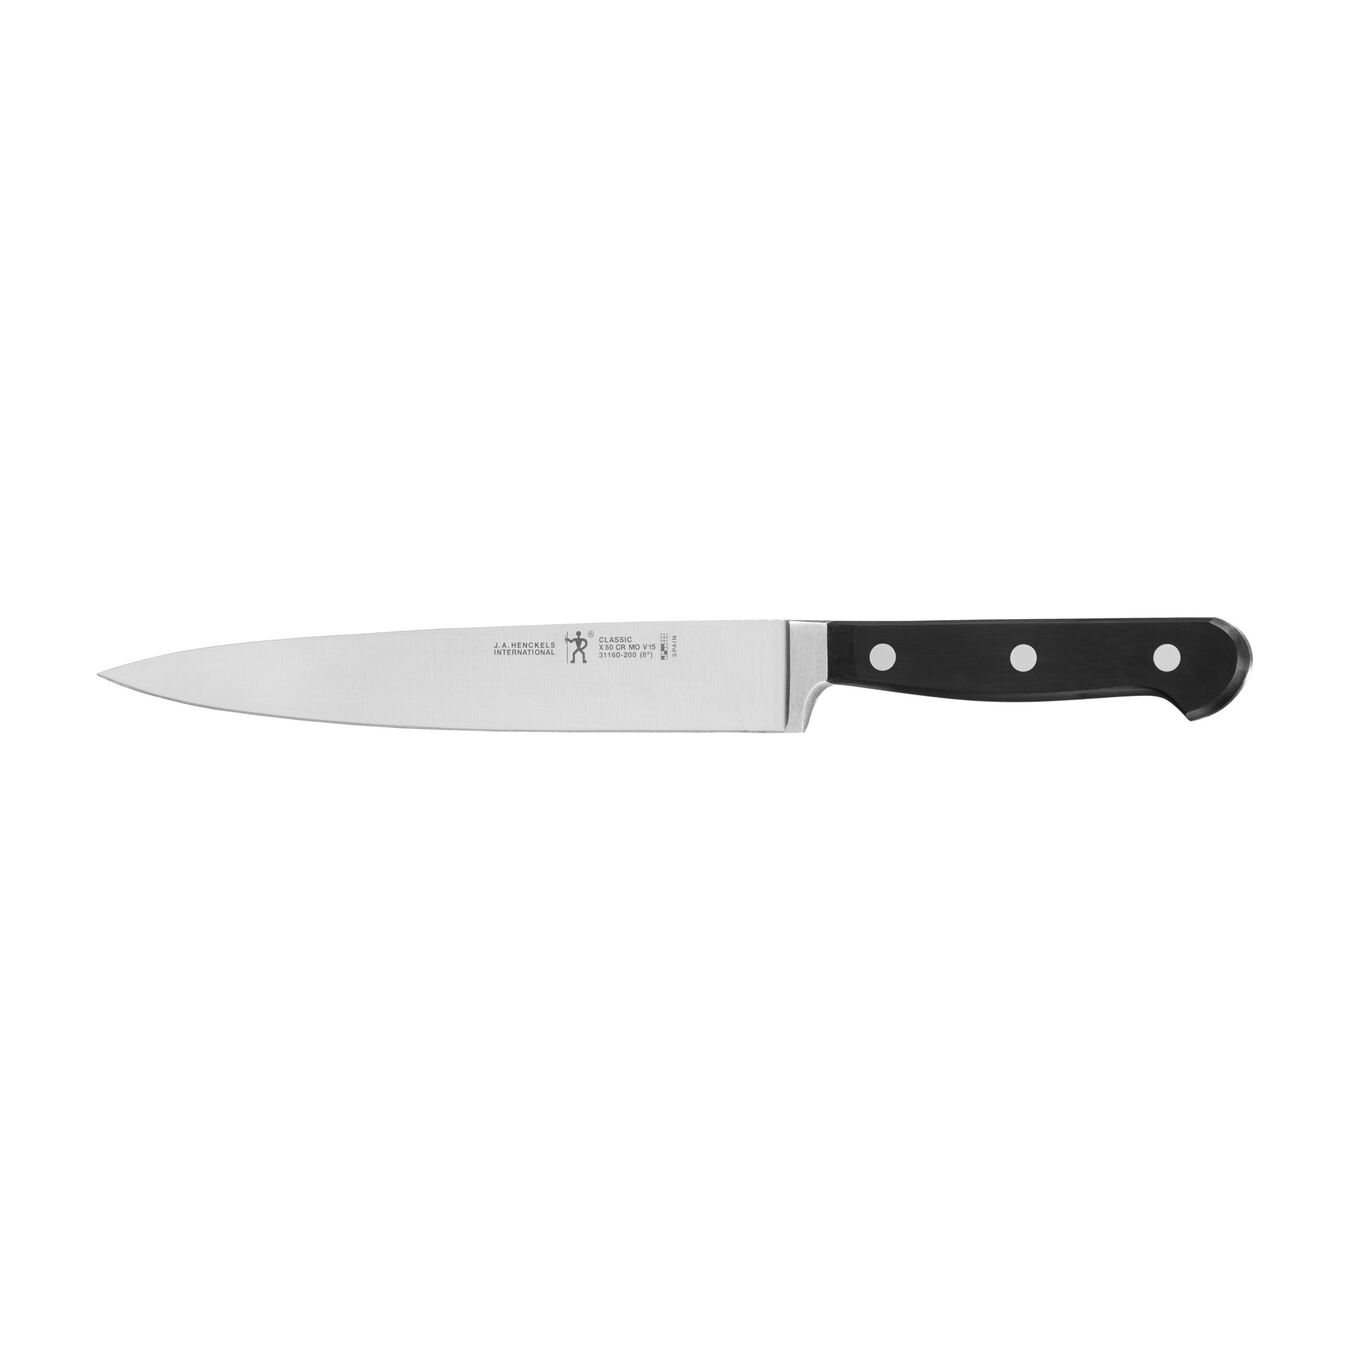 8-inch, Slicing/Carving Knife,,large 1